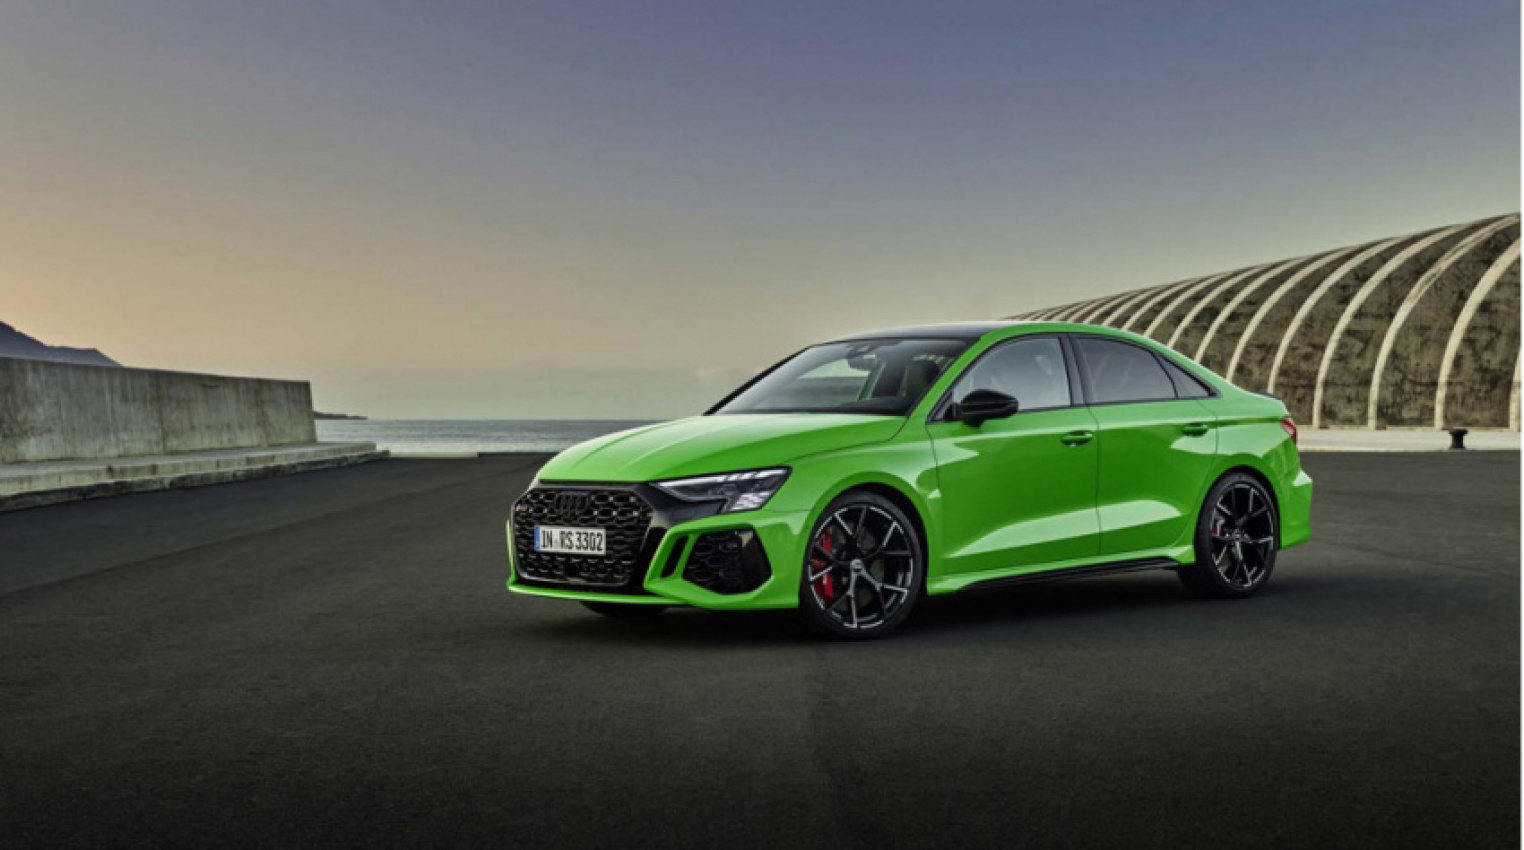 audi, autos, cars, ram, audi a3 news, audi news, luxury cars, performance, sedans, videos, vnex, youtube, preview: 2022 audi rs 3 ramps up turbo-5 power and track capability for under $60,000